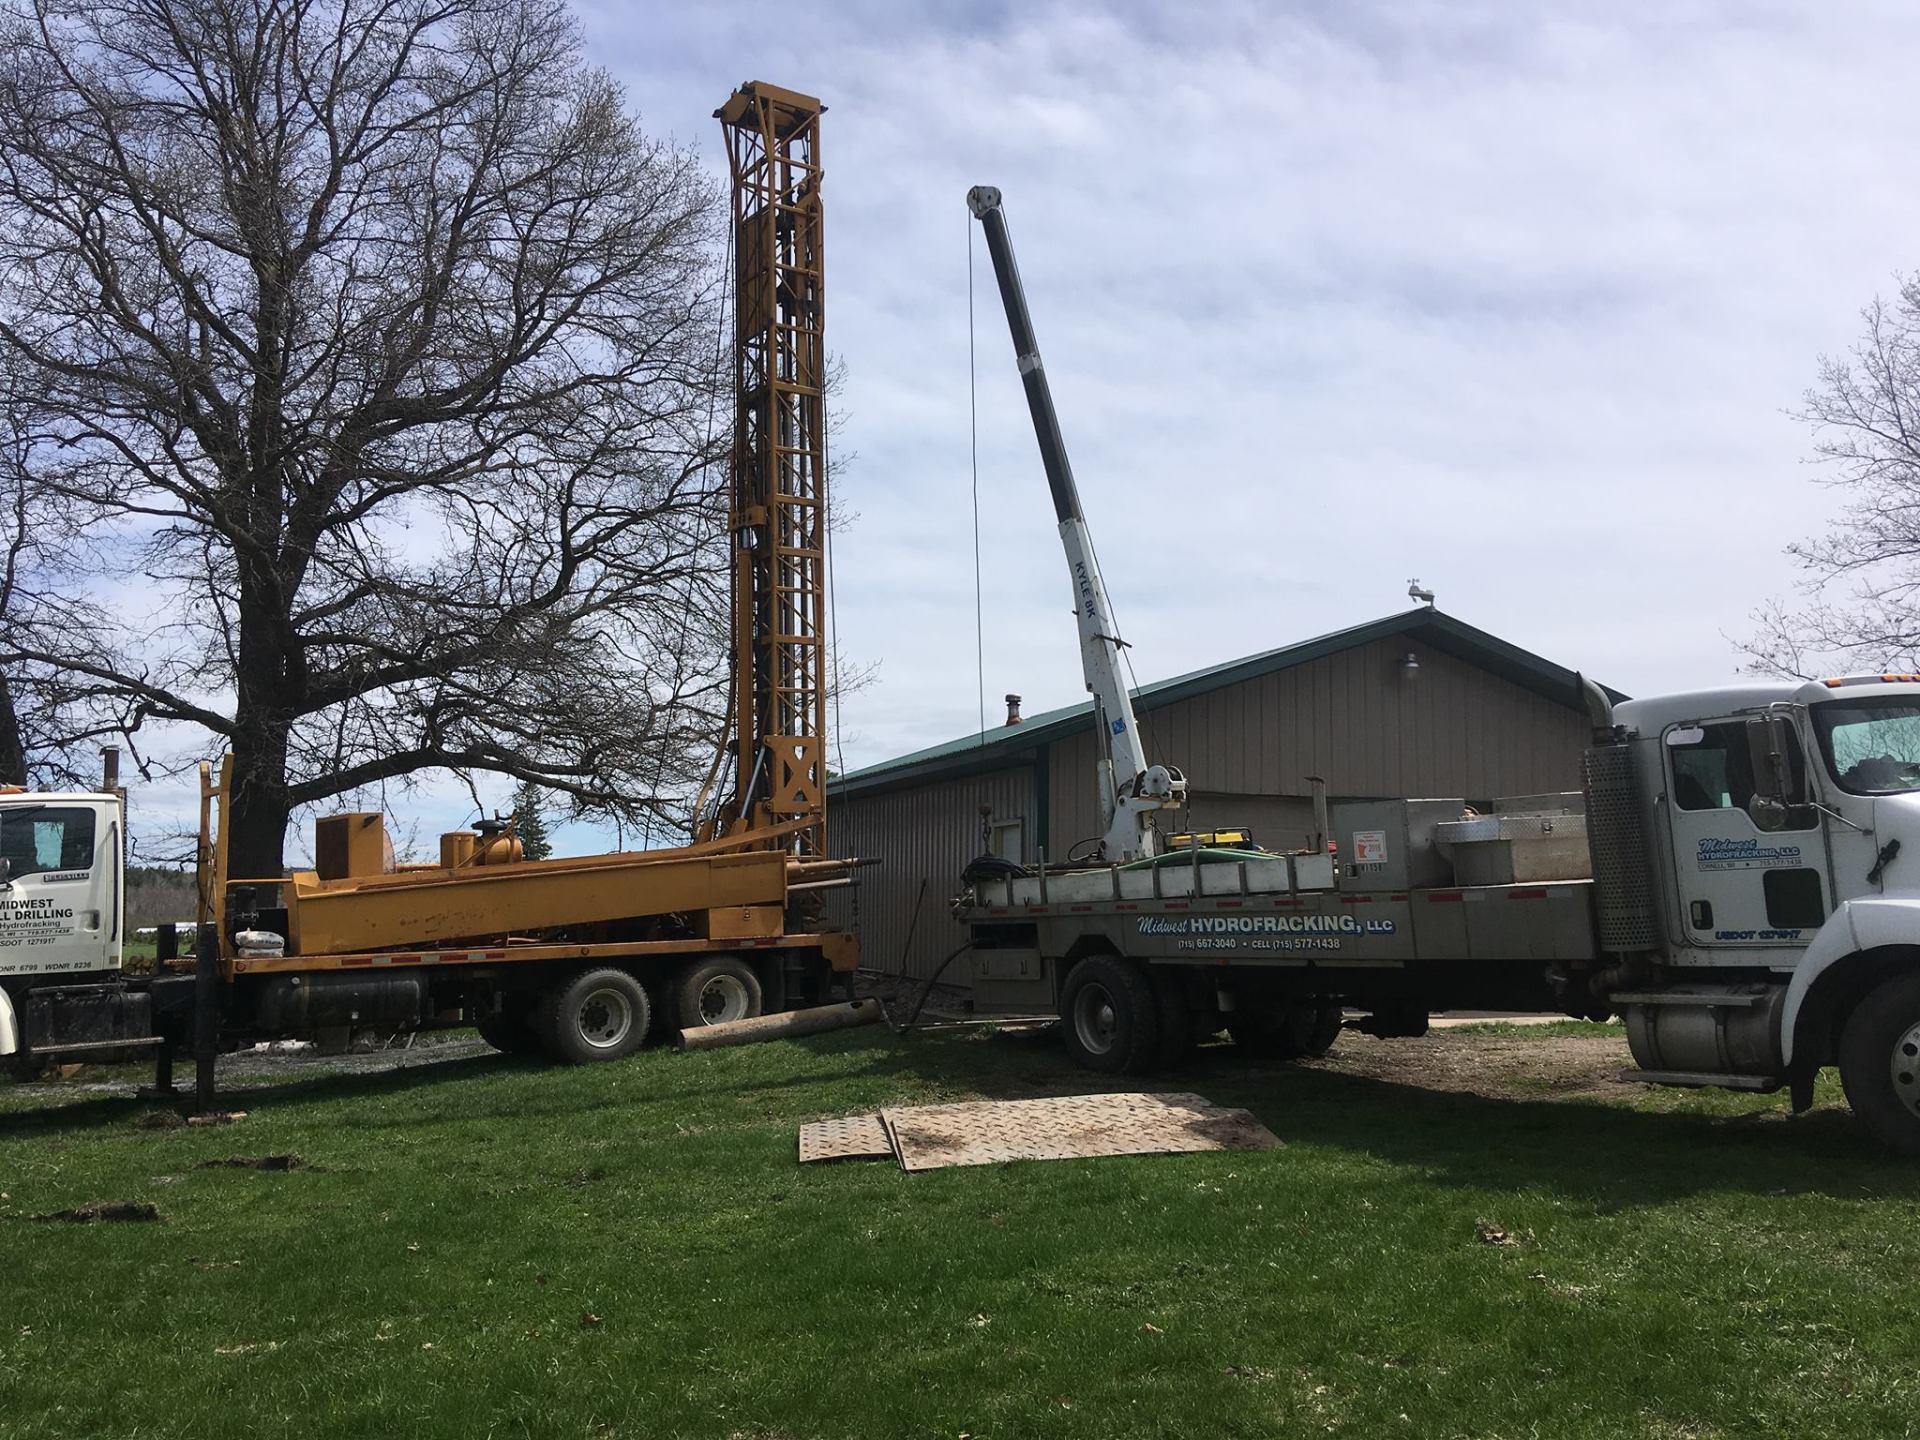 Commercial well drilling